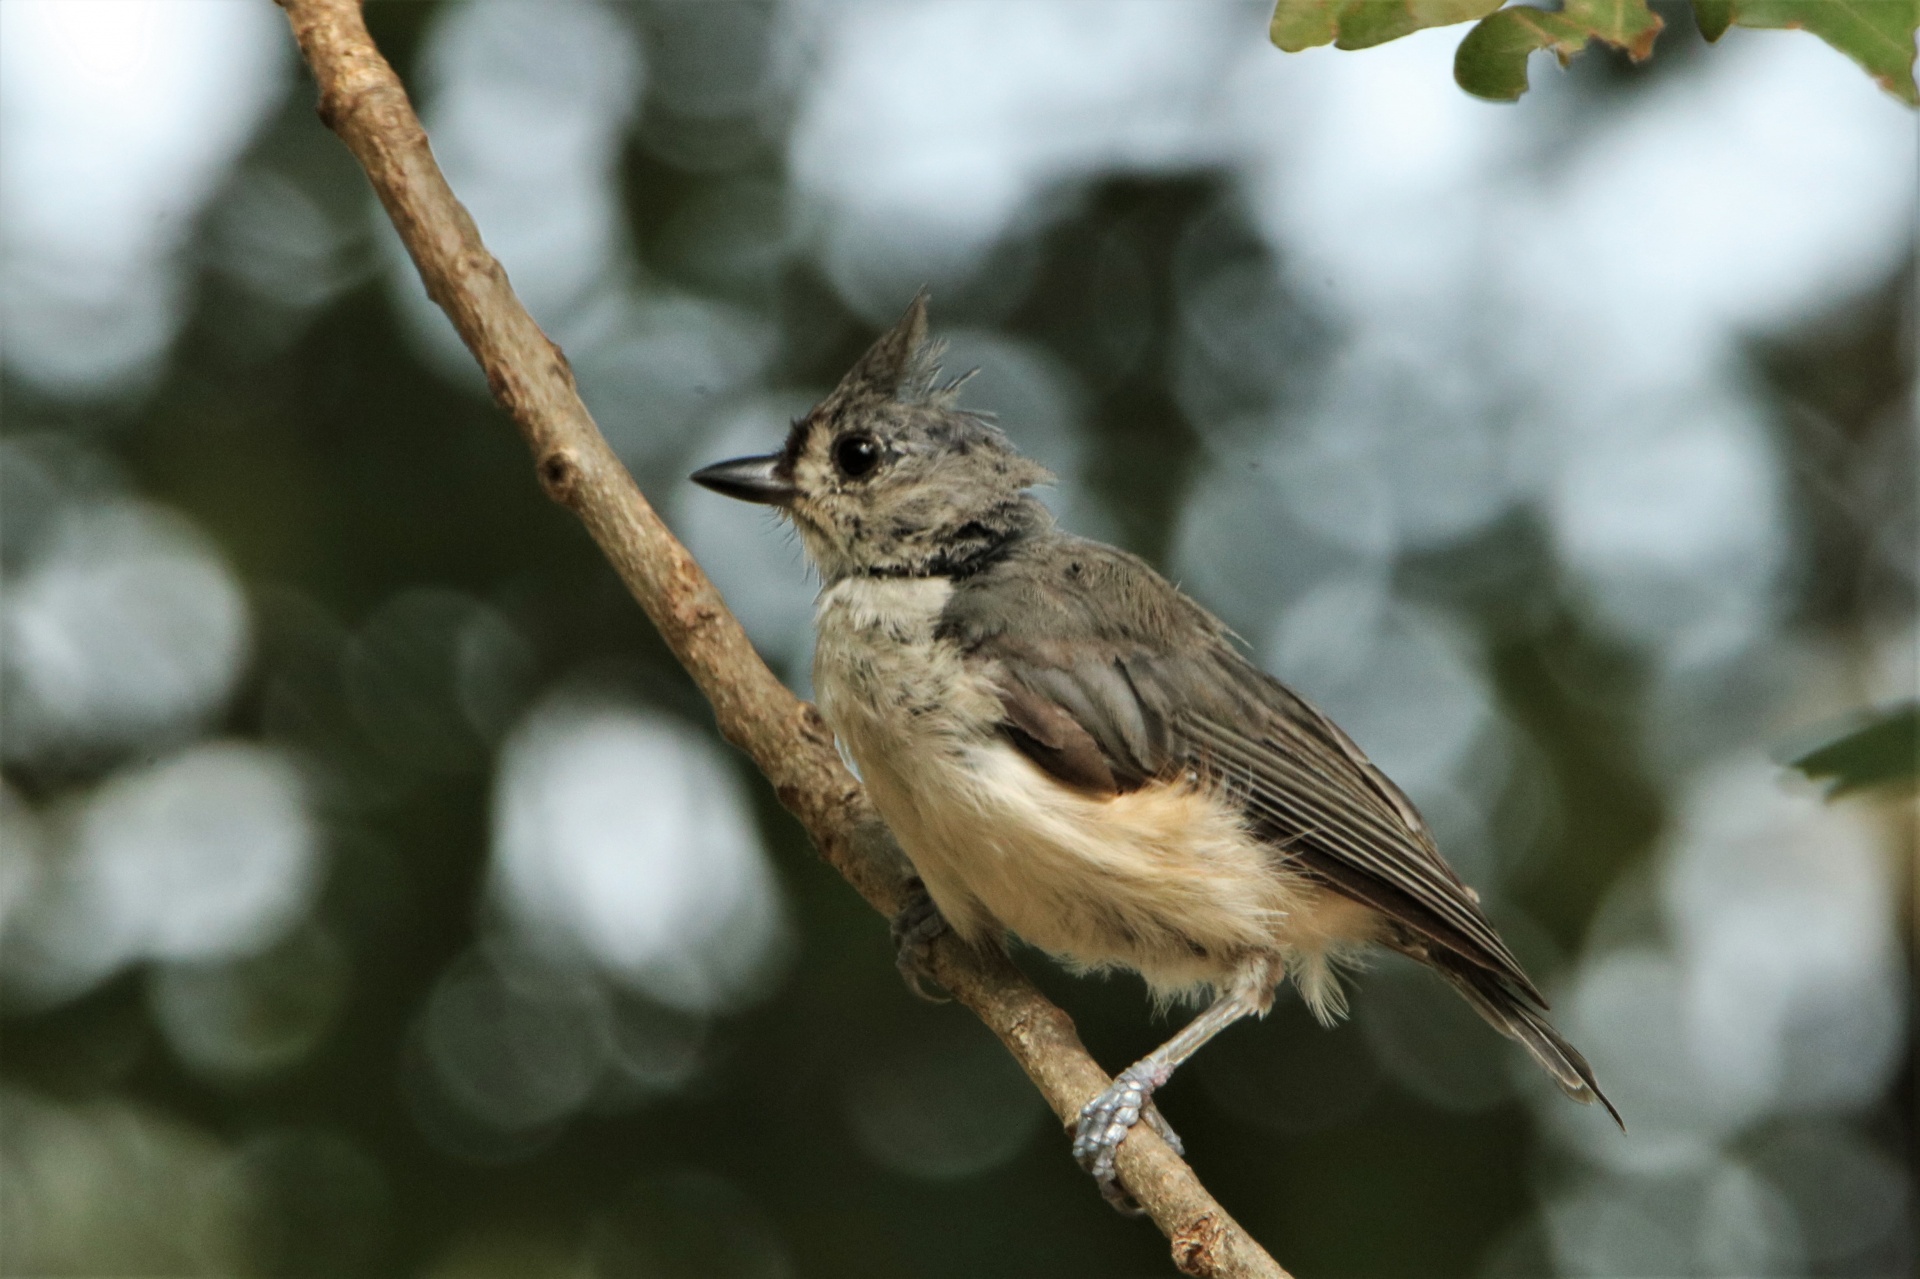 Close-up of a young tufted titmouse perched on a tree branch, with a sparkling bokeh background.